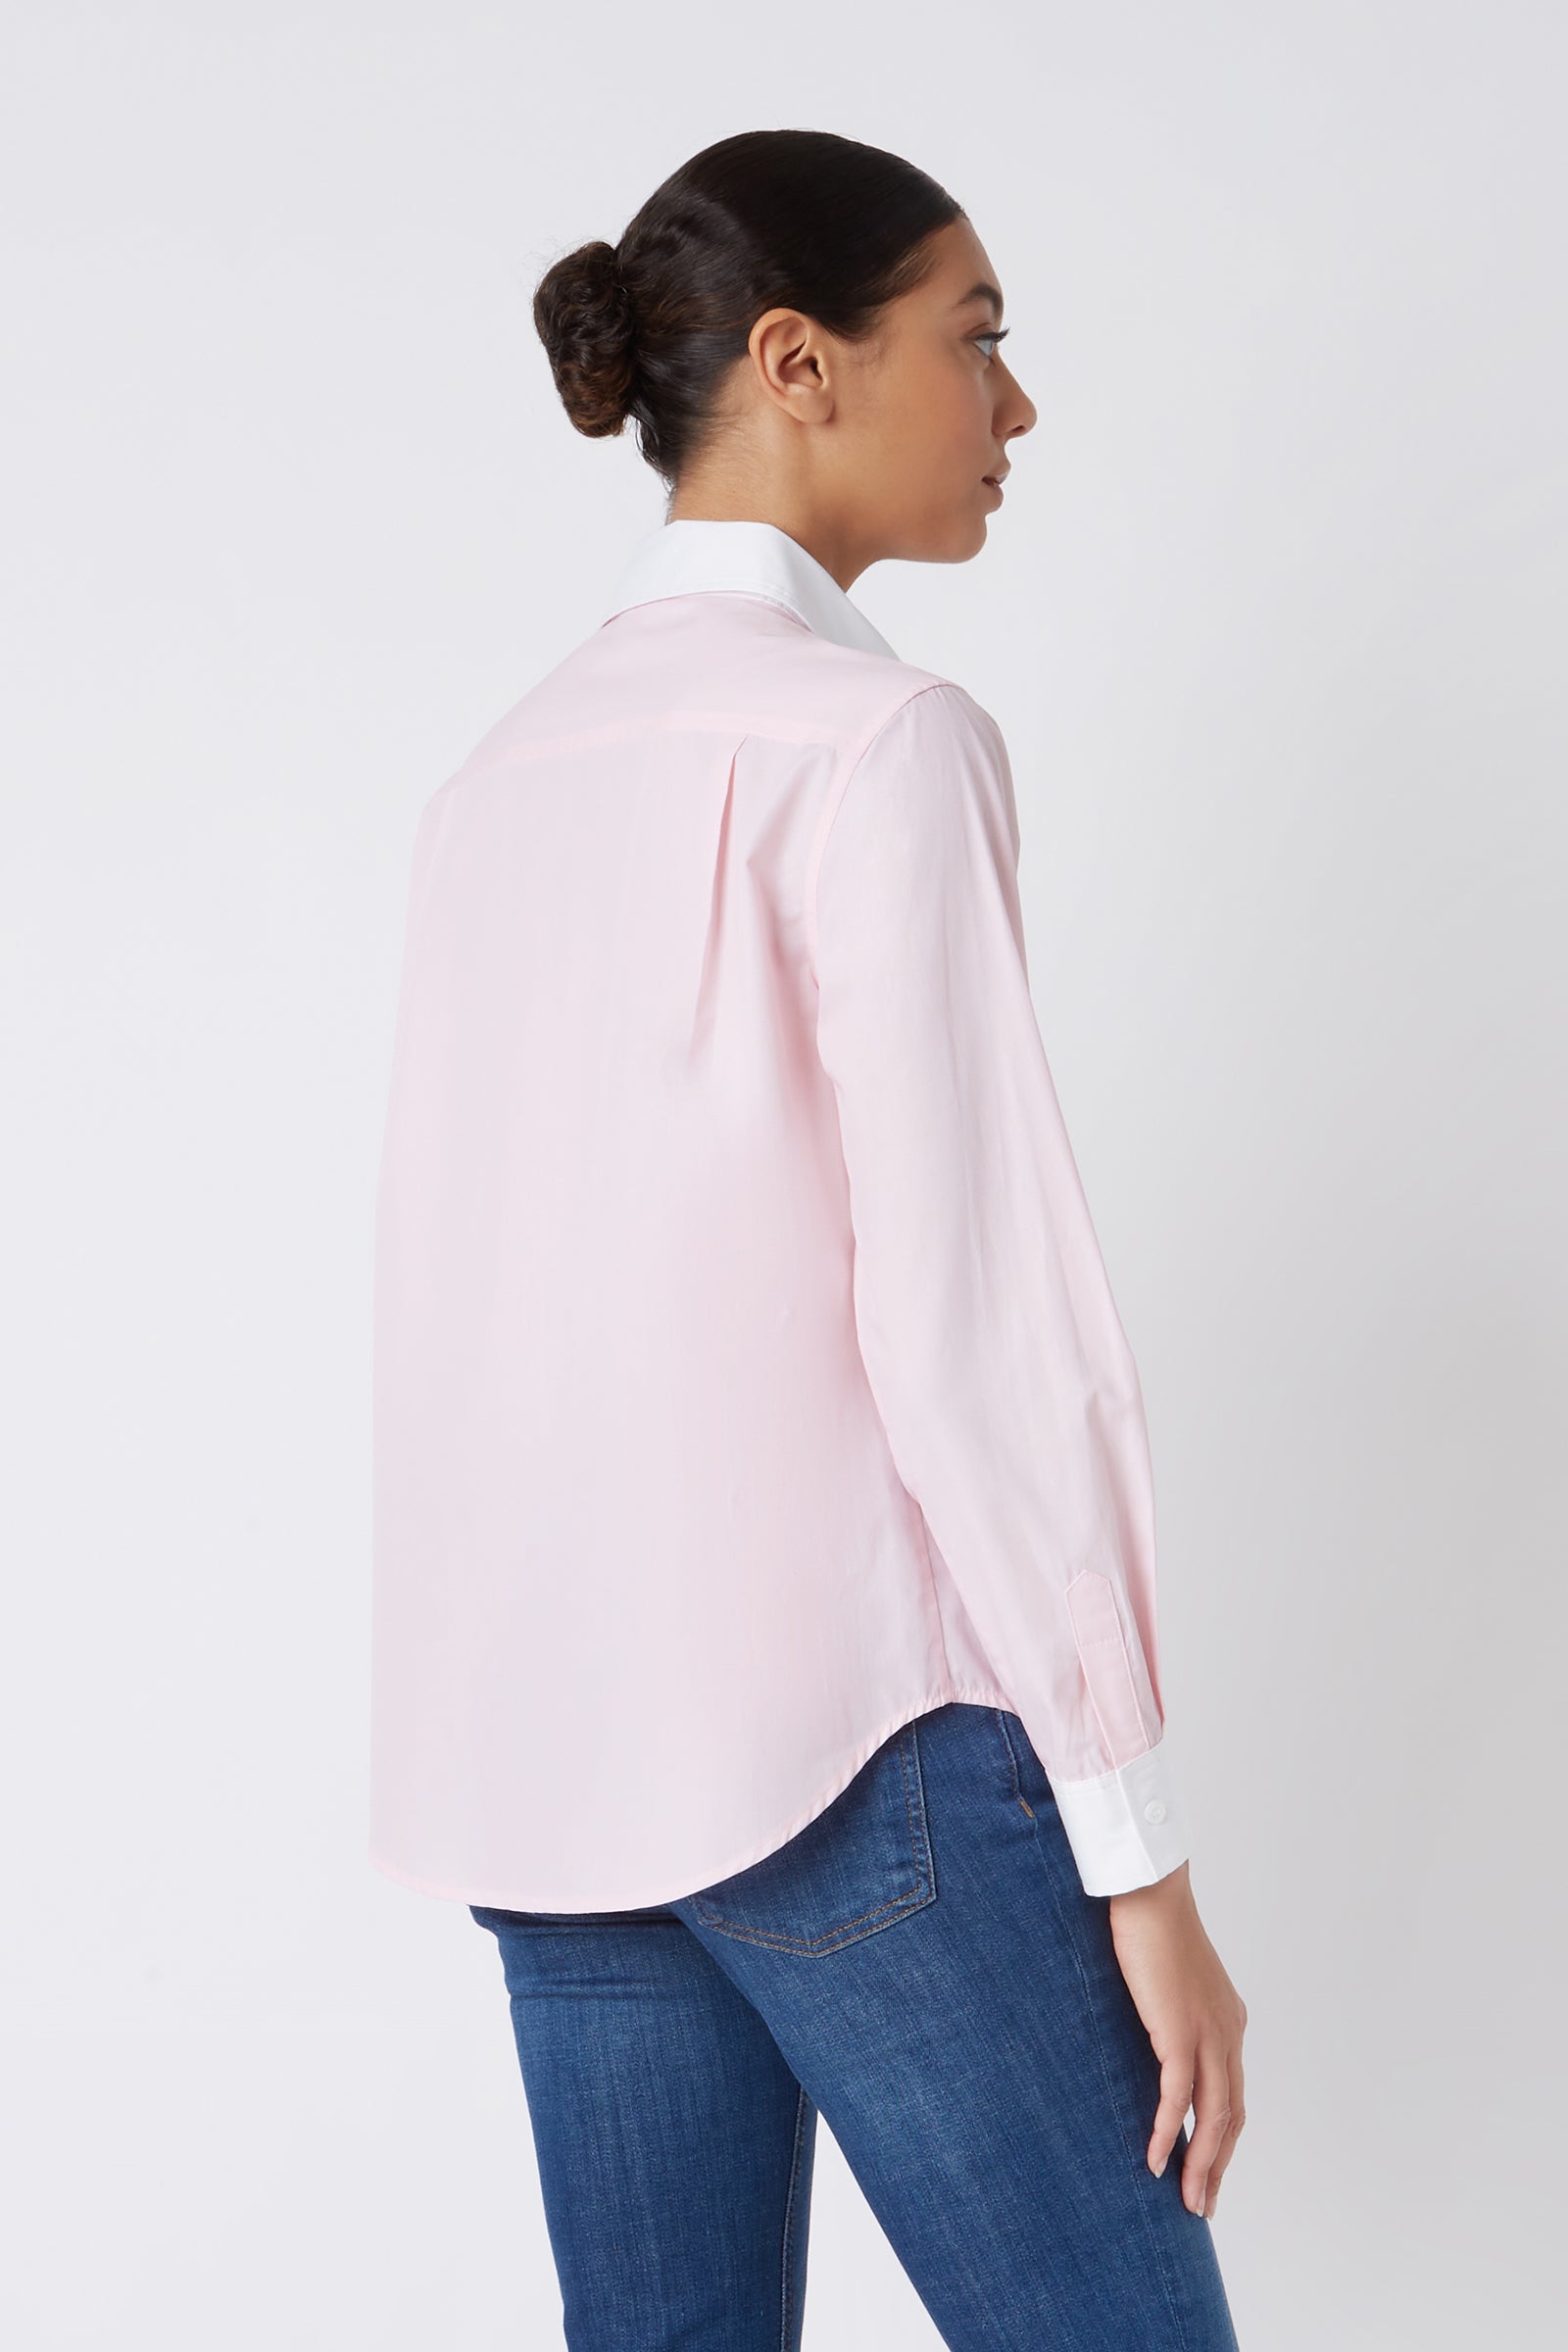 Kal Rieman Classic Tailored Shirt in Pink with White on Model Cropped Back View